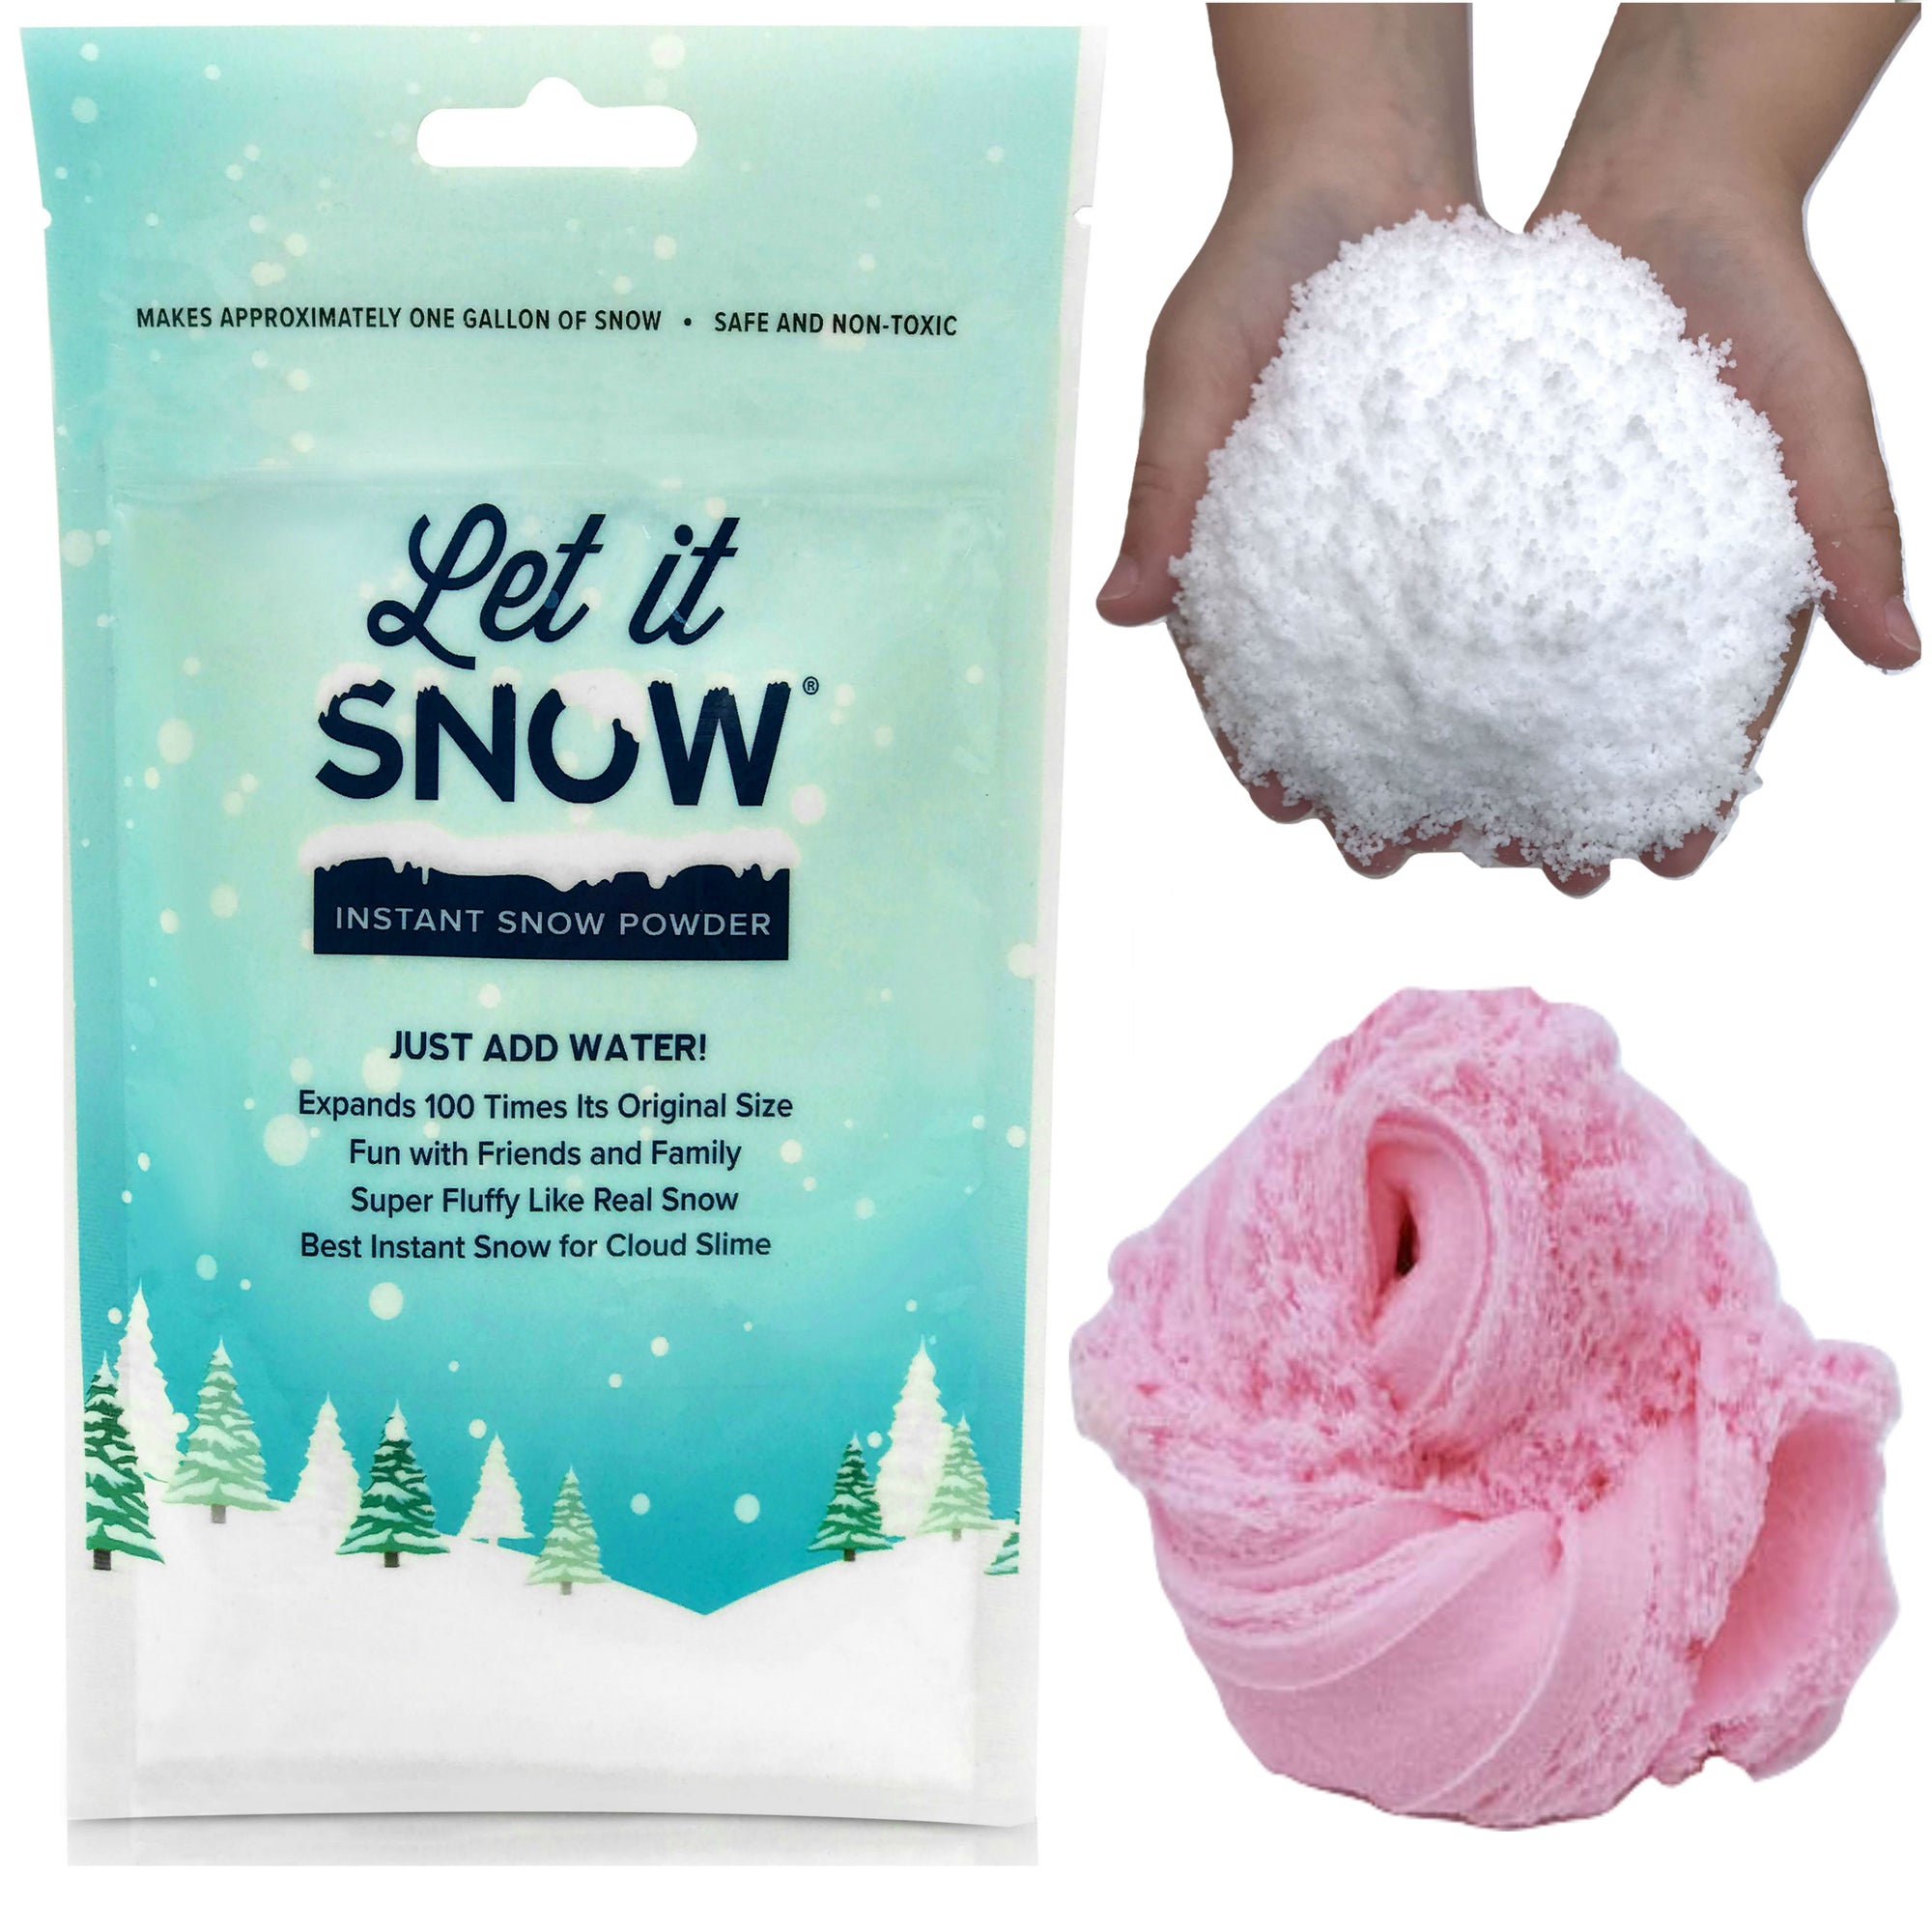 AINOLWAY Instant Snow Fake Snow Powder for Cloud Slime, Makes 5 Gallons of Artificial Snow